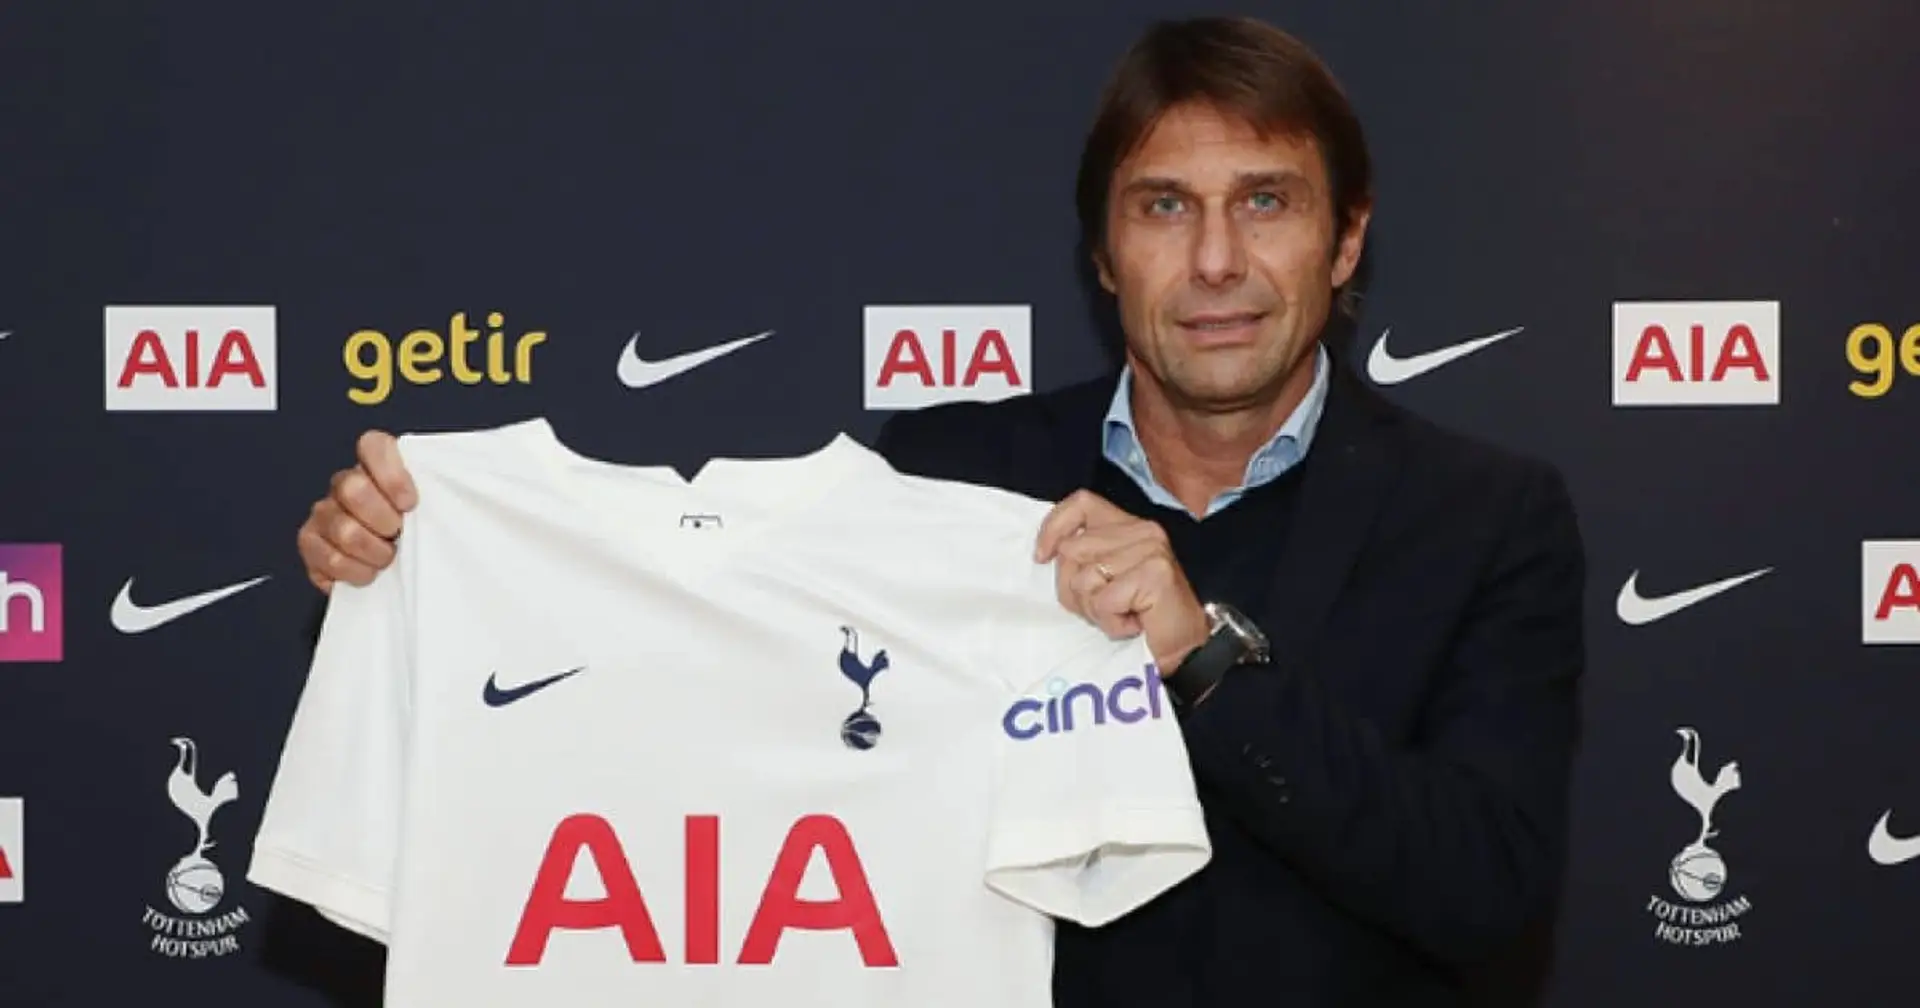 'It's a great pleasure, a great honour': Antonio Conte's first interview as new Tottenham manager